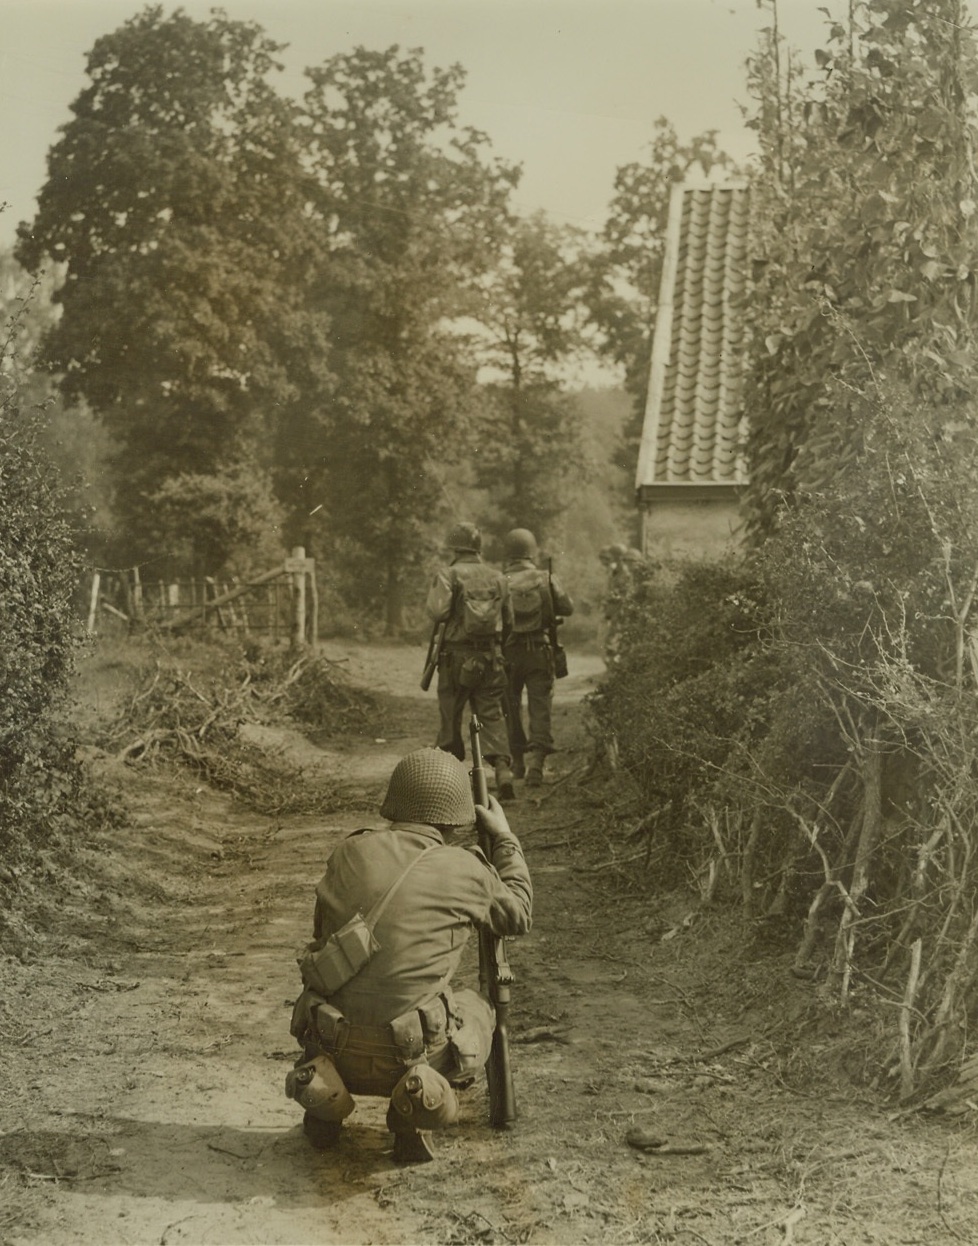 Over the Border, 9/18/1944. GERMANY -- There's no difference in soil, dust, on foliage from one end of this country lane to the other, but the steps that carried the Yanks in background down the path took them into Germany. Squatting behind them, a buddy watches the boys cross the border near Aachen. "Boy, this is what I walked across France and Belgium to see," he said. Credit: - WP- (Photo by Bert Brandt of ACME, for the War Picture Pool);